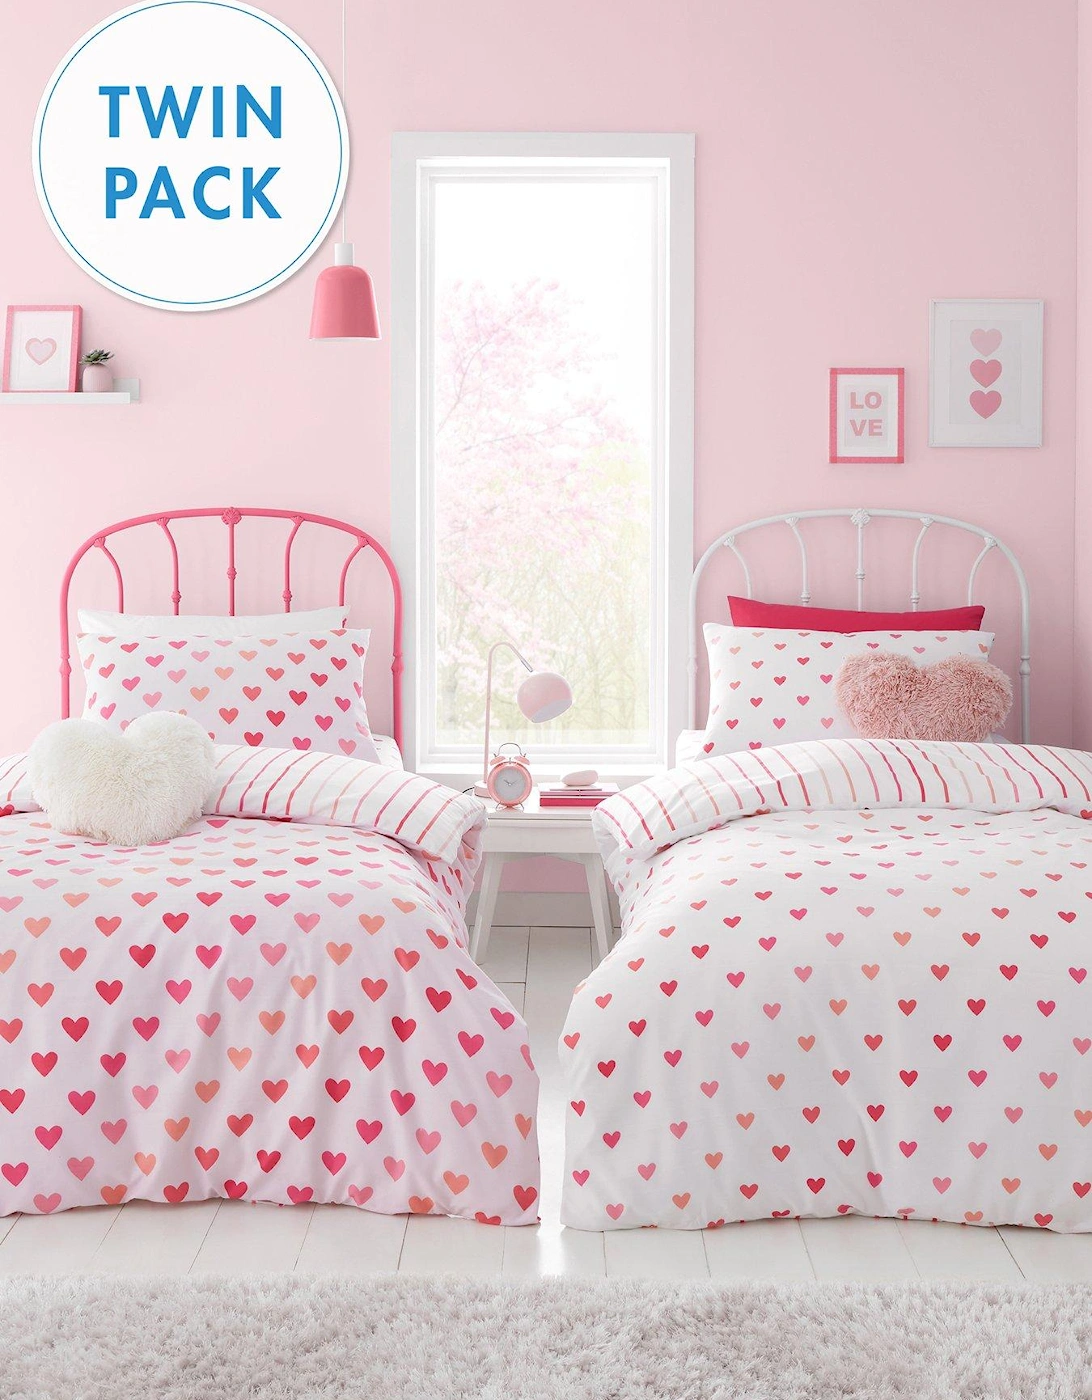 Hearts and Stripes Duvet Cover Set Twin Pack, 2 of 1